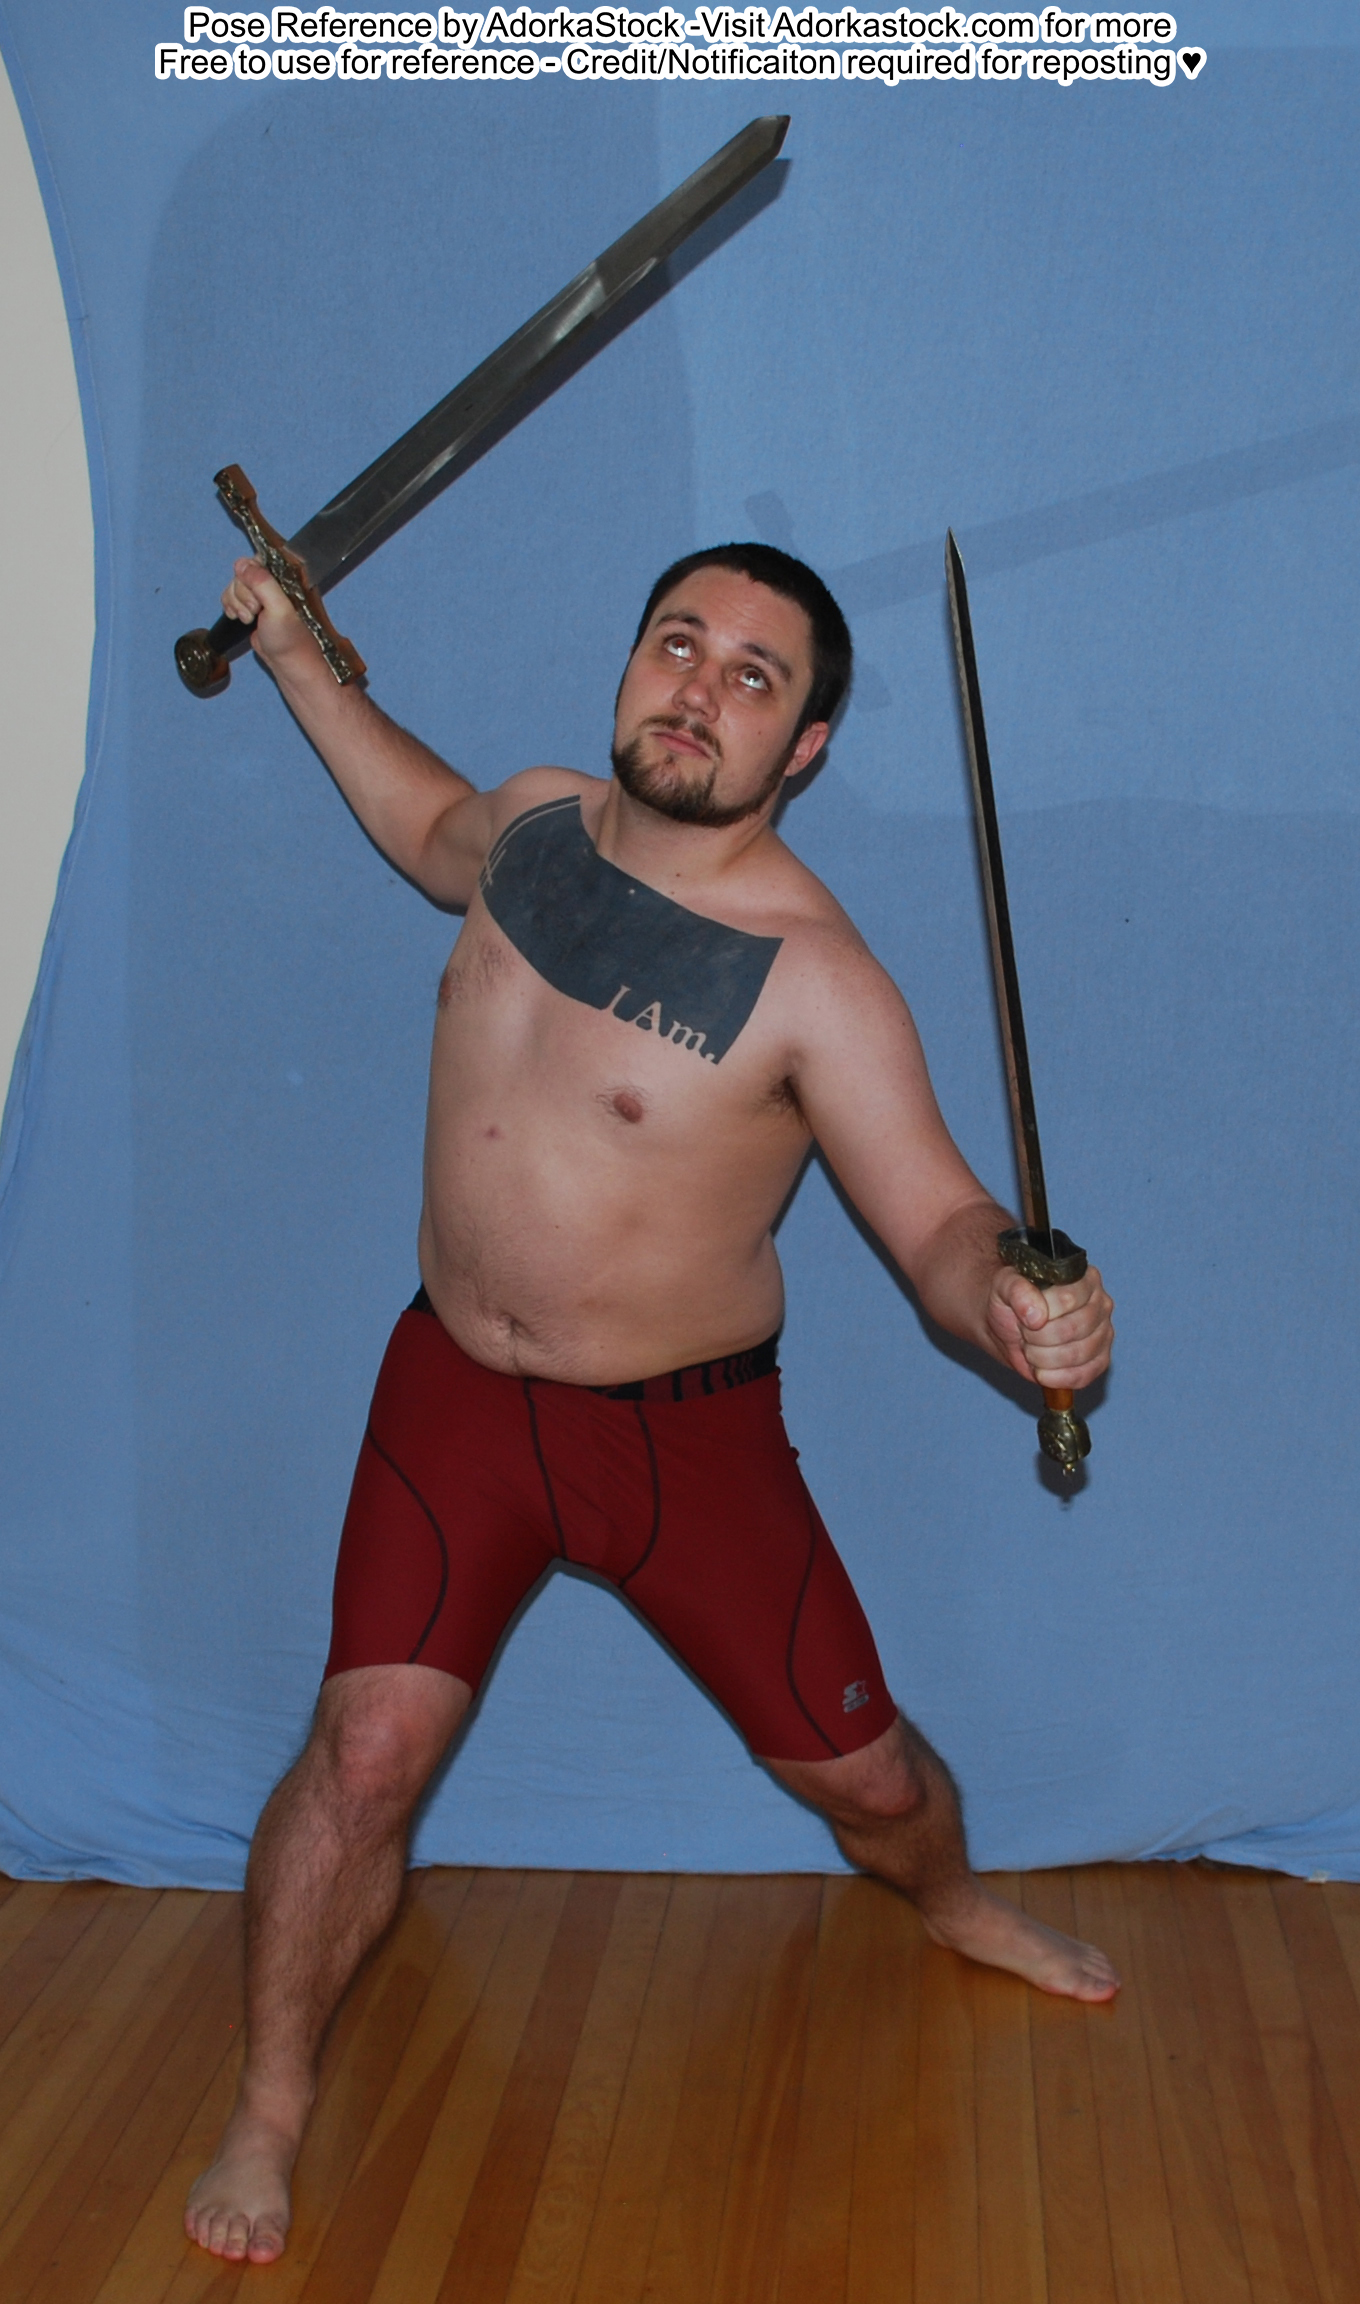 fit, white, male pose reference model in standing pose with two swords up and out